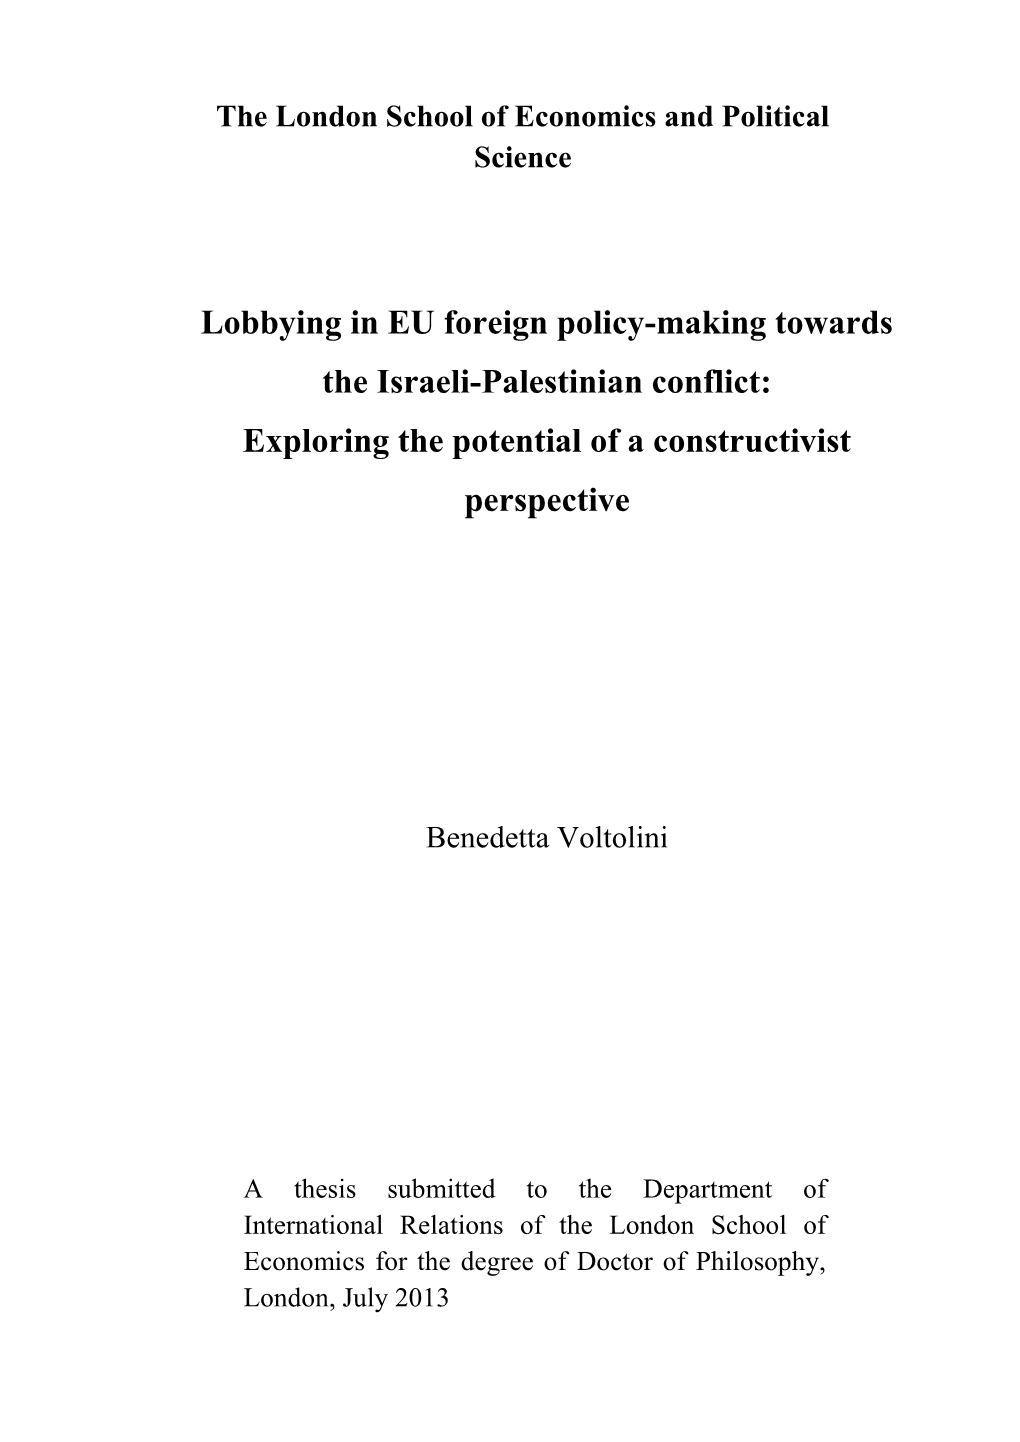 Lobbying in EU Foreign Policy-Making Towards the Israeli-Palestinian Conflict: Exploring the Potential of a Constructivist Perspective